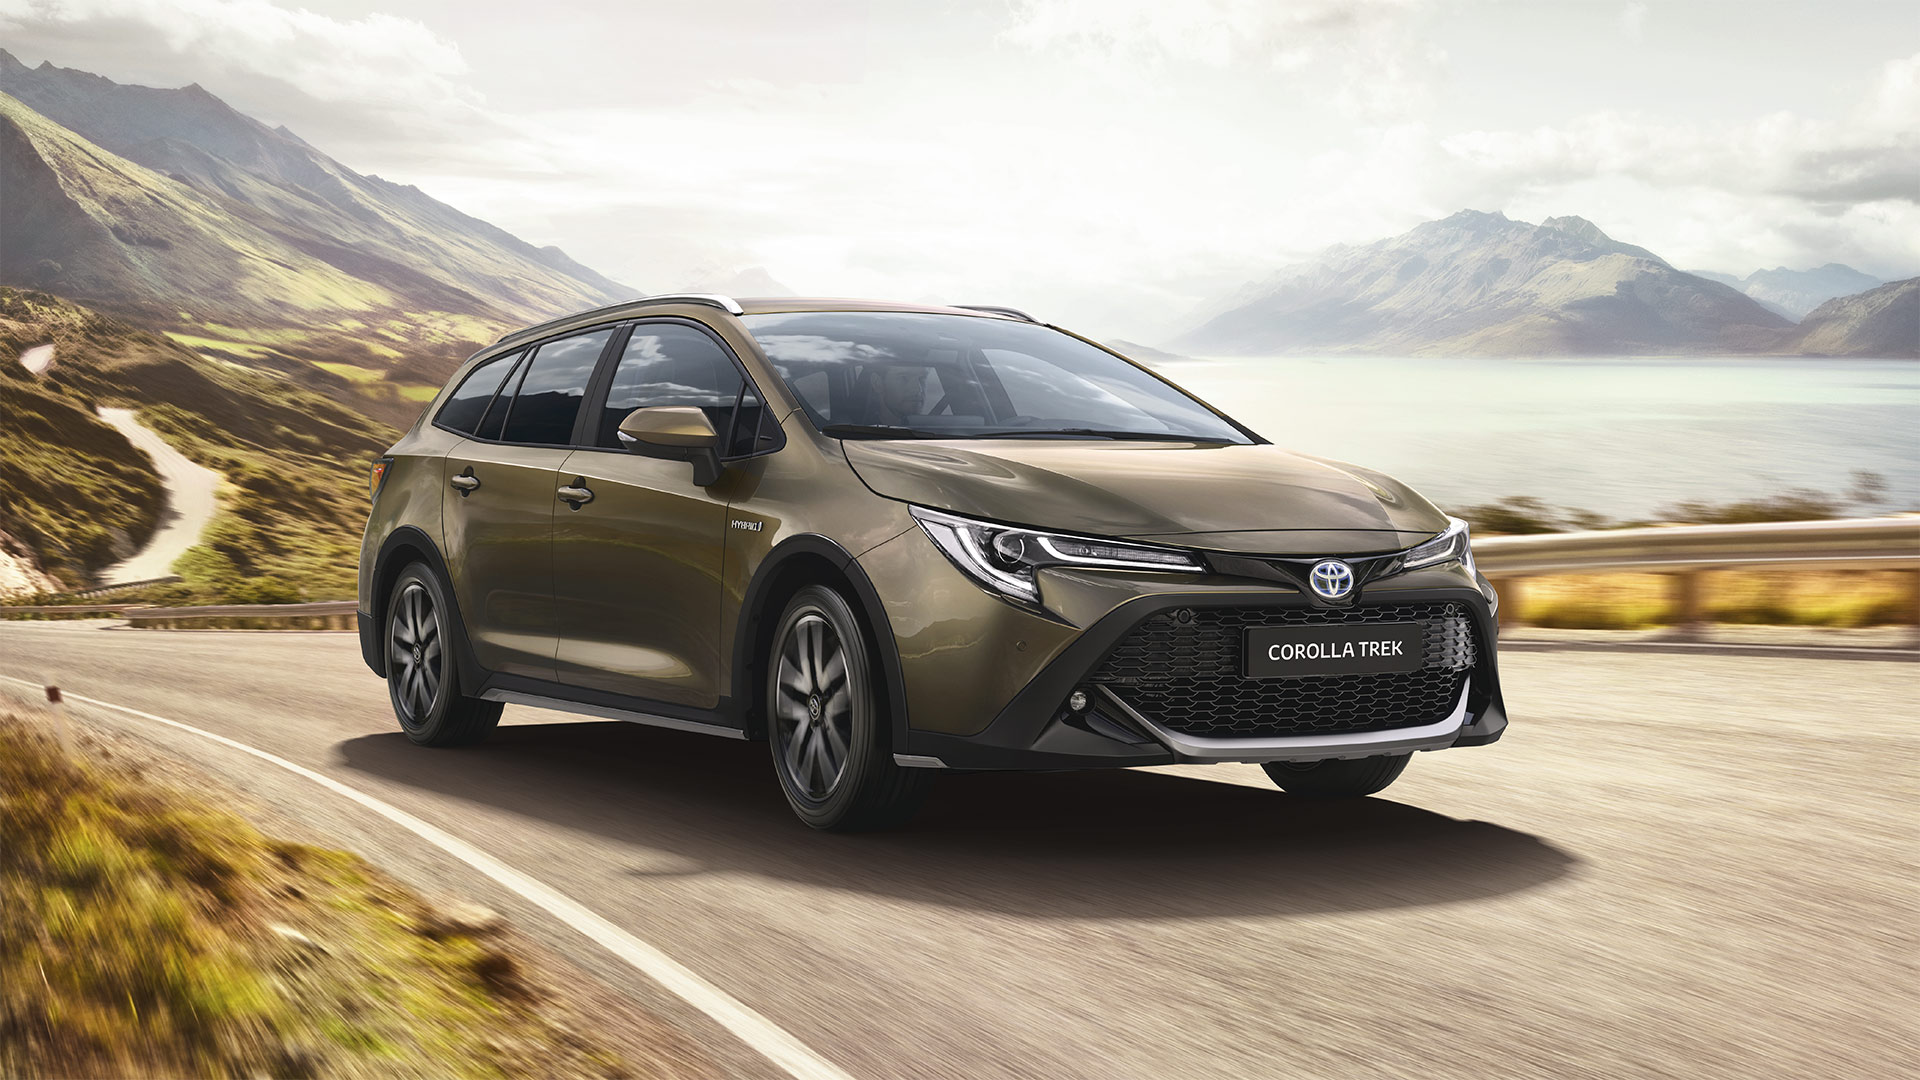 The new Corolla Trek takes influences from one of the world's best-known bicycle manufacturers